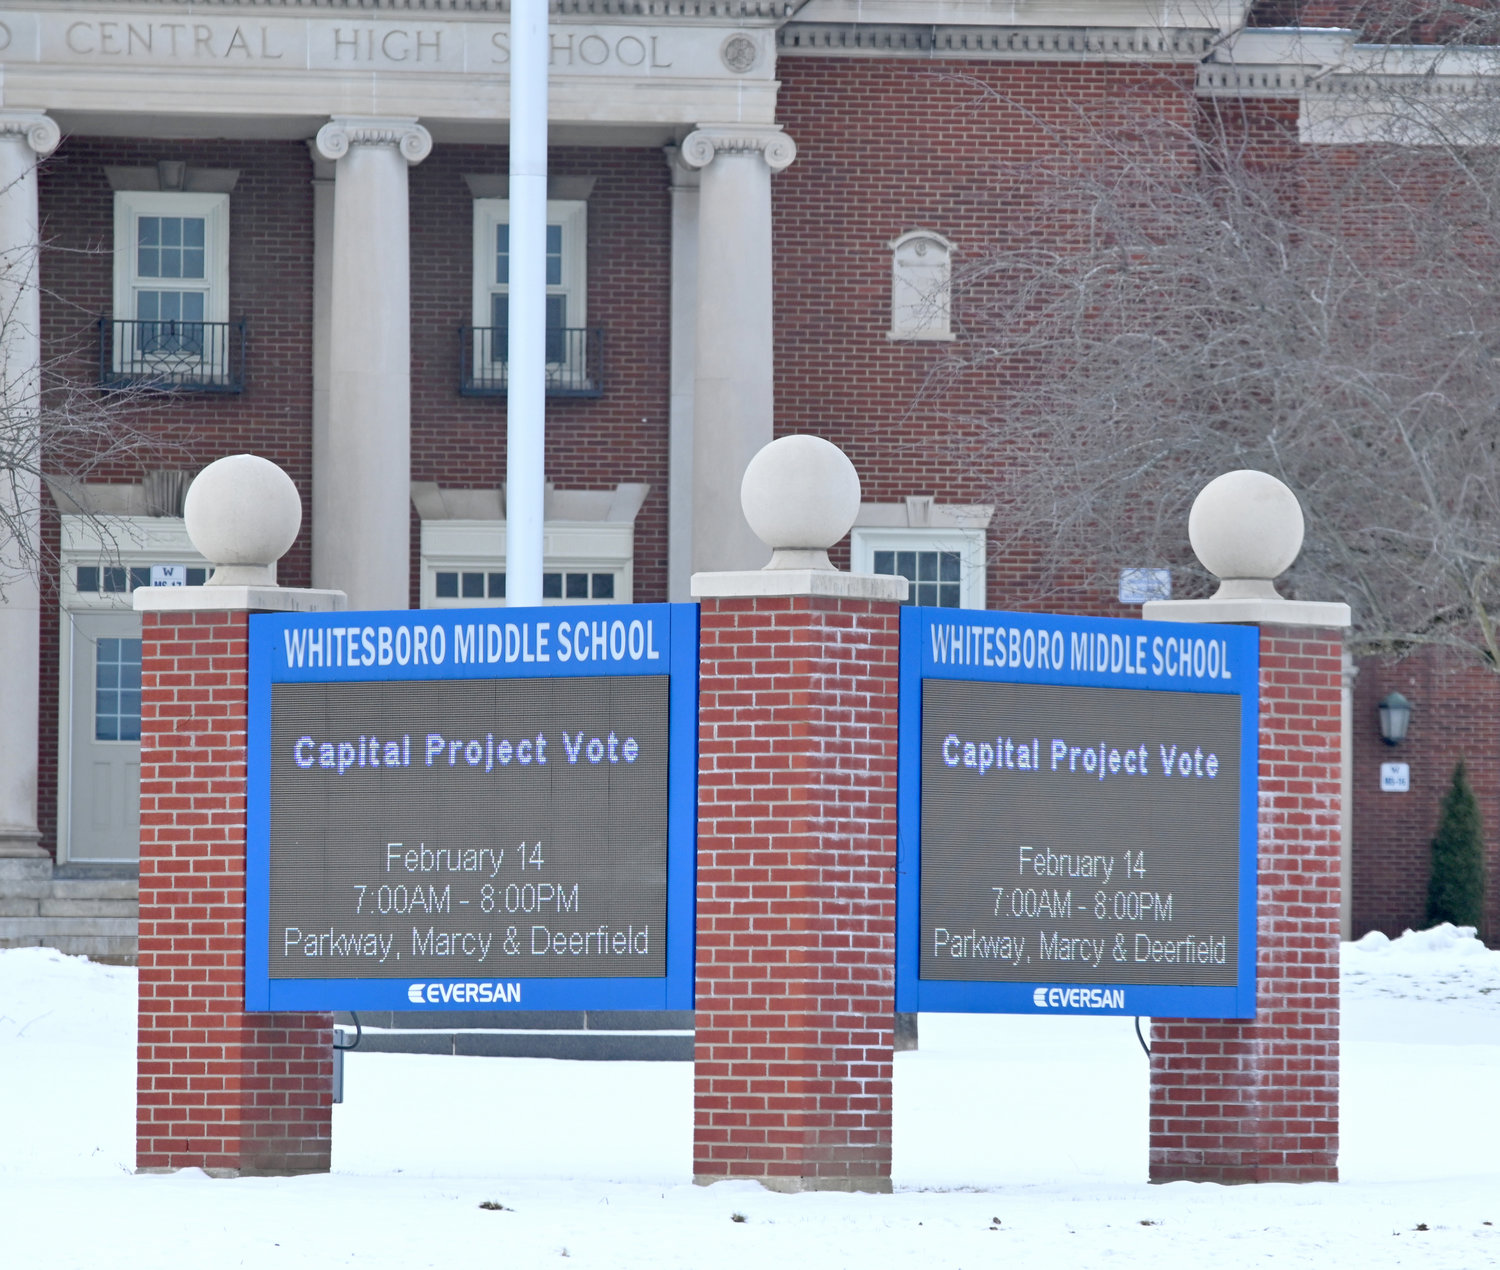 The marquee in front of the Whitesboro Middle School, 75 Oriskany Blvd., reminds district residents that they can soon have their say on the proposed $26 million capital project. The vote will take place from 7 a.m. to 8 p.m. Tuesday, Feb. 14, at the Parkway, Marcy and Deerfield schools.